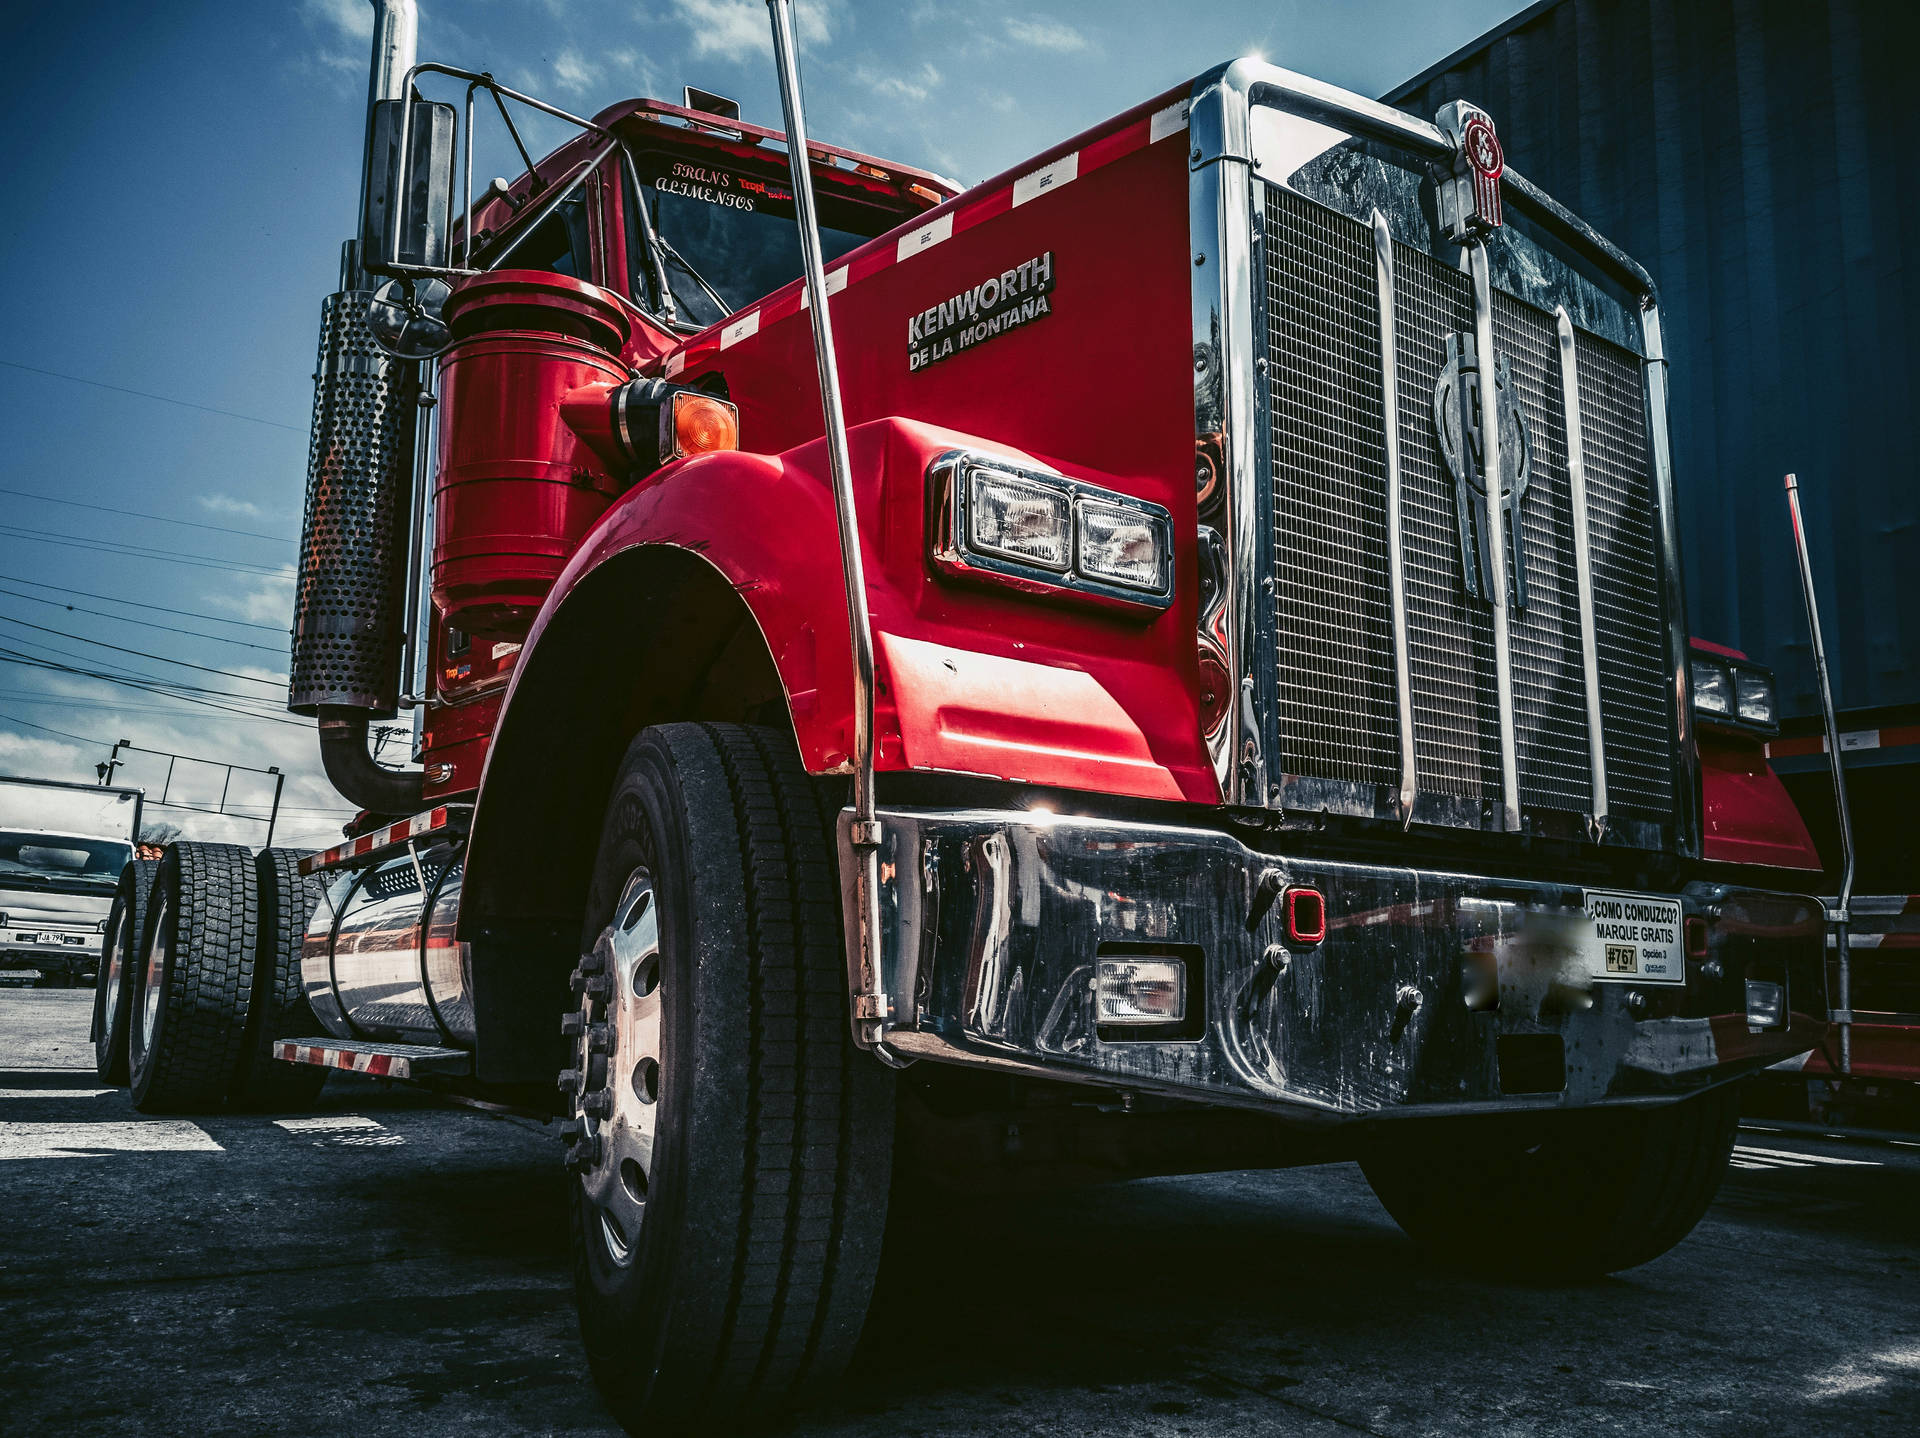 Truck 4592X3440 Wallpaper and Background Image